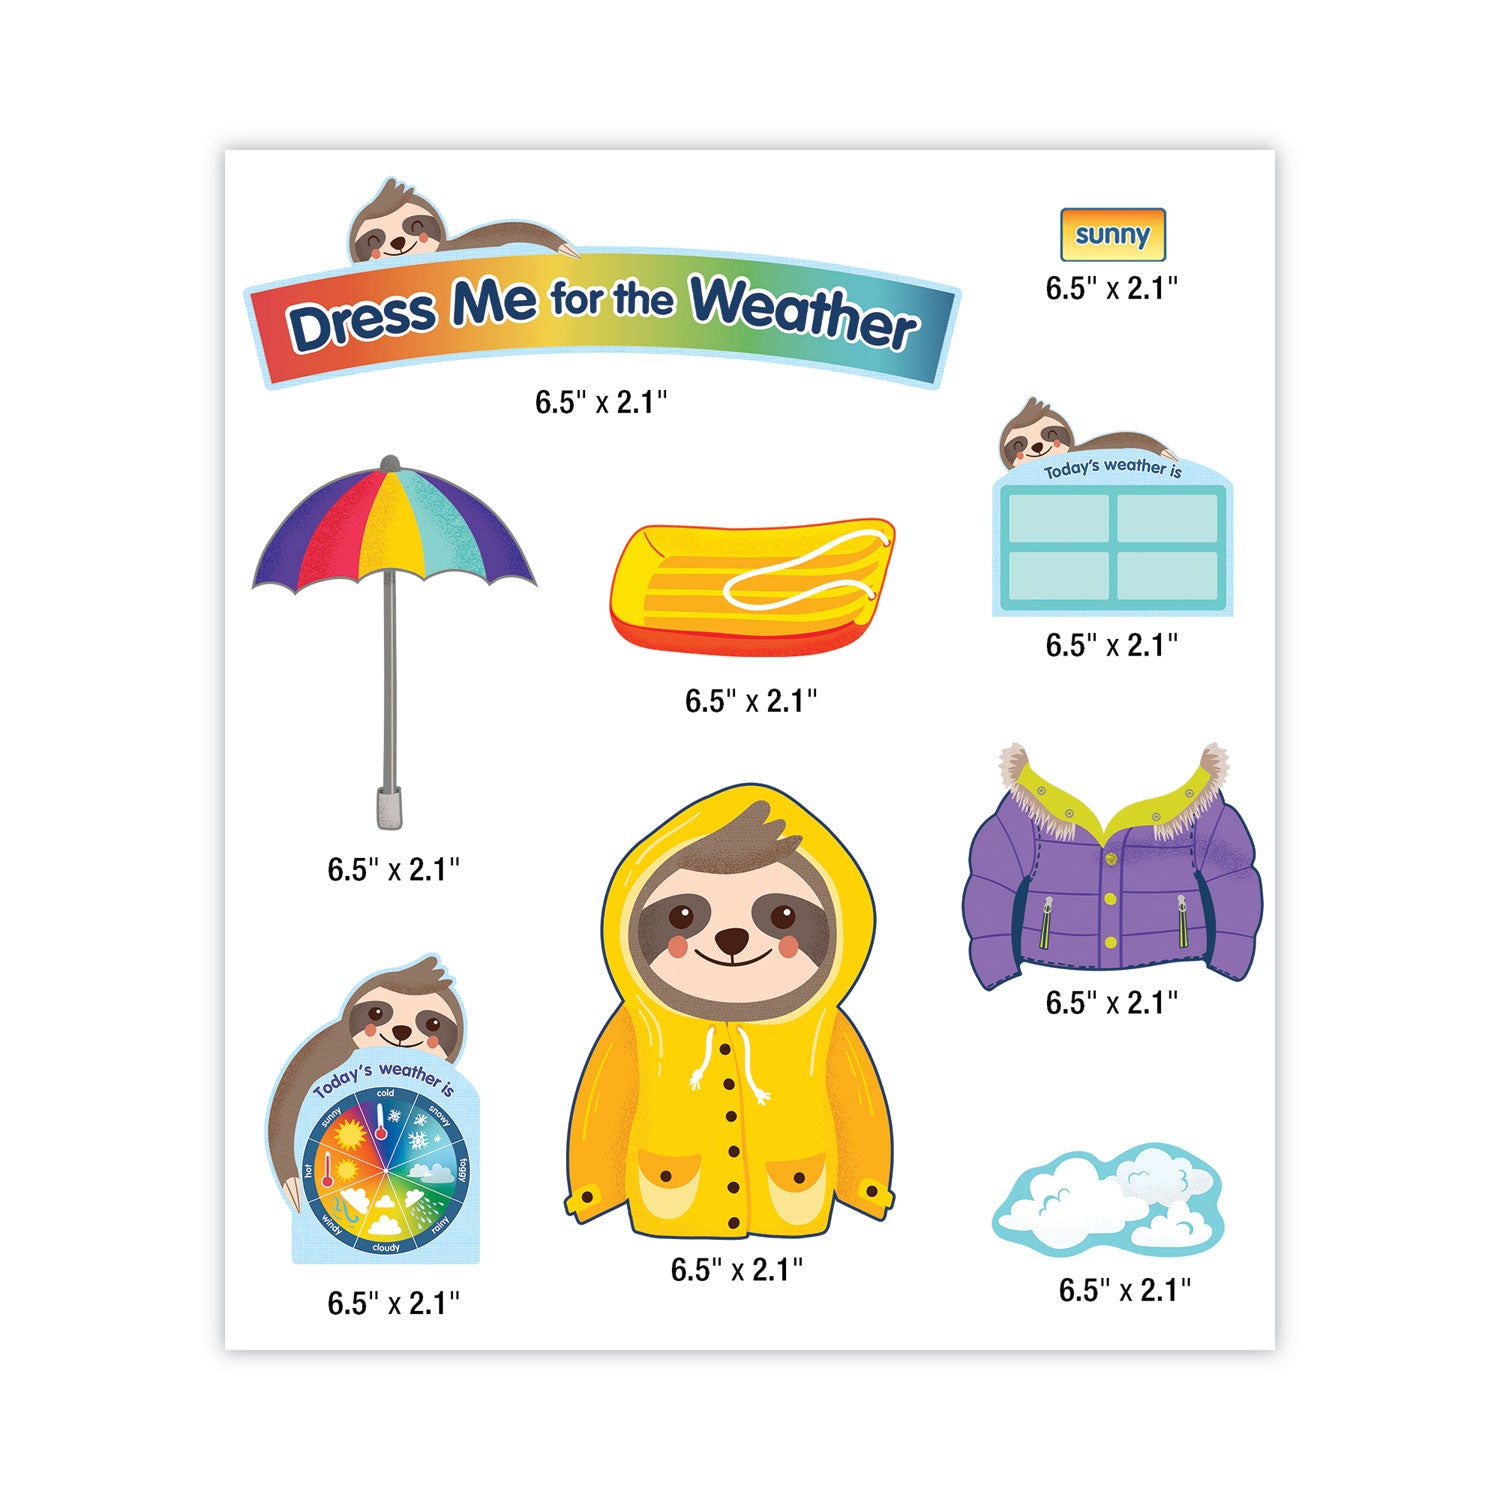 curriculum-bulletin-board-set-dress-me-for-the-weather-54-pieces_cdp110487 - 6